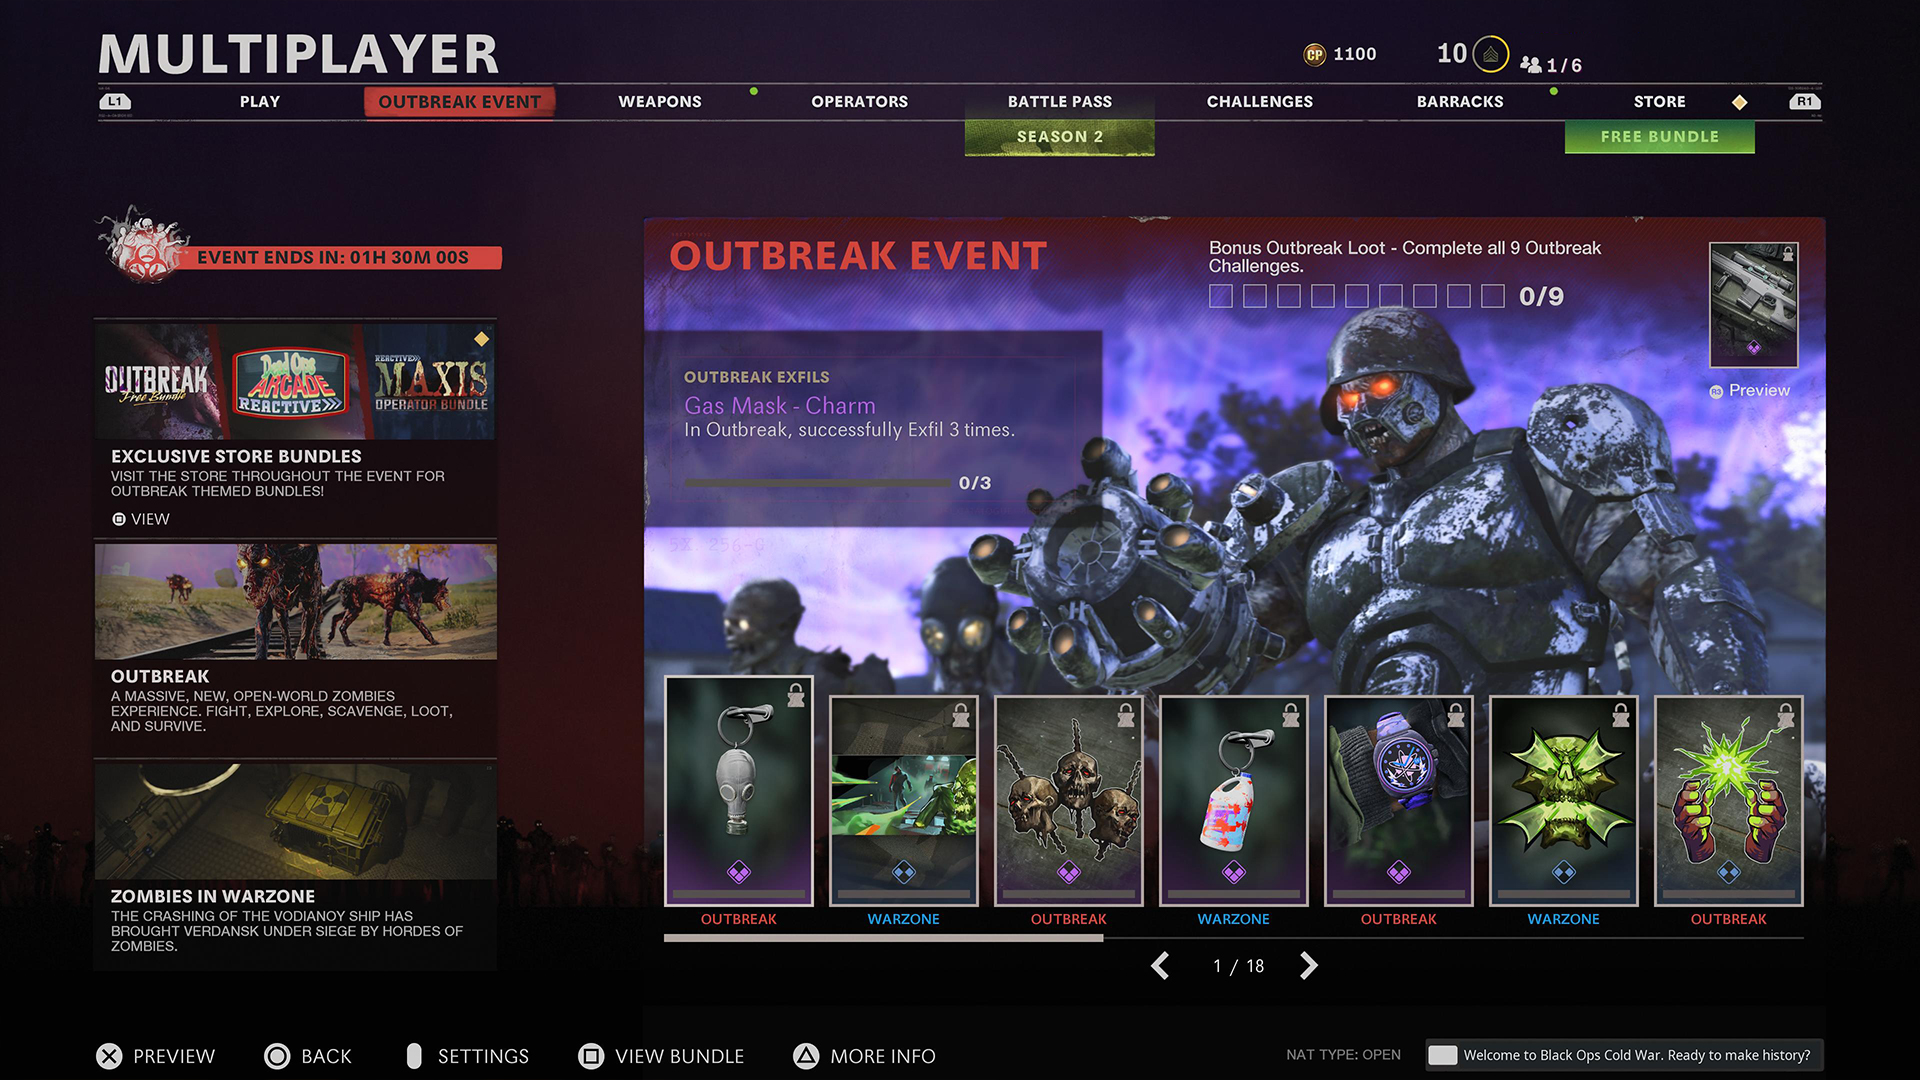 I don't even know if this is where I go to play Outbreak... (Screenshot: Activision / Kotaku)